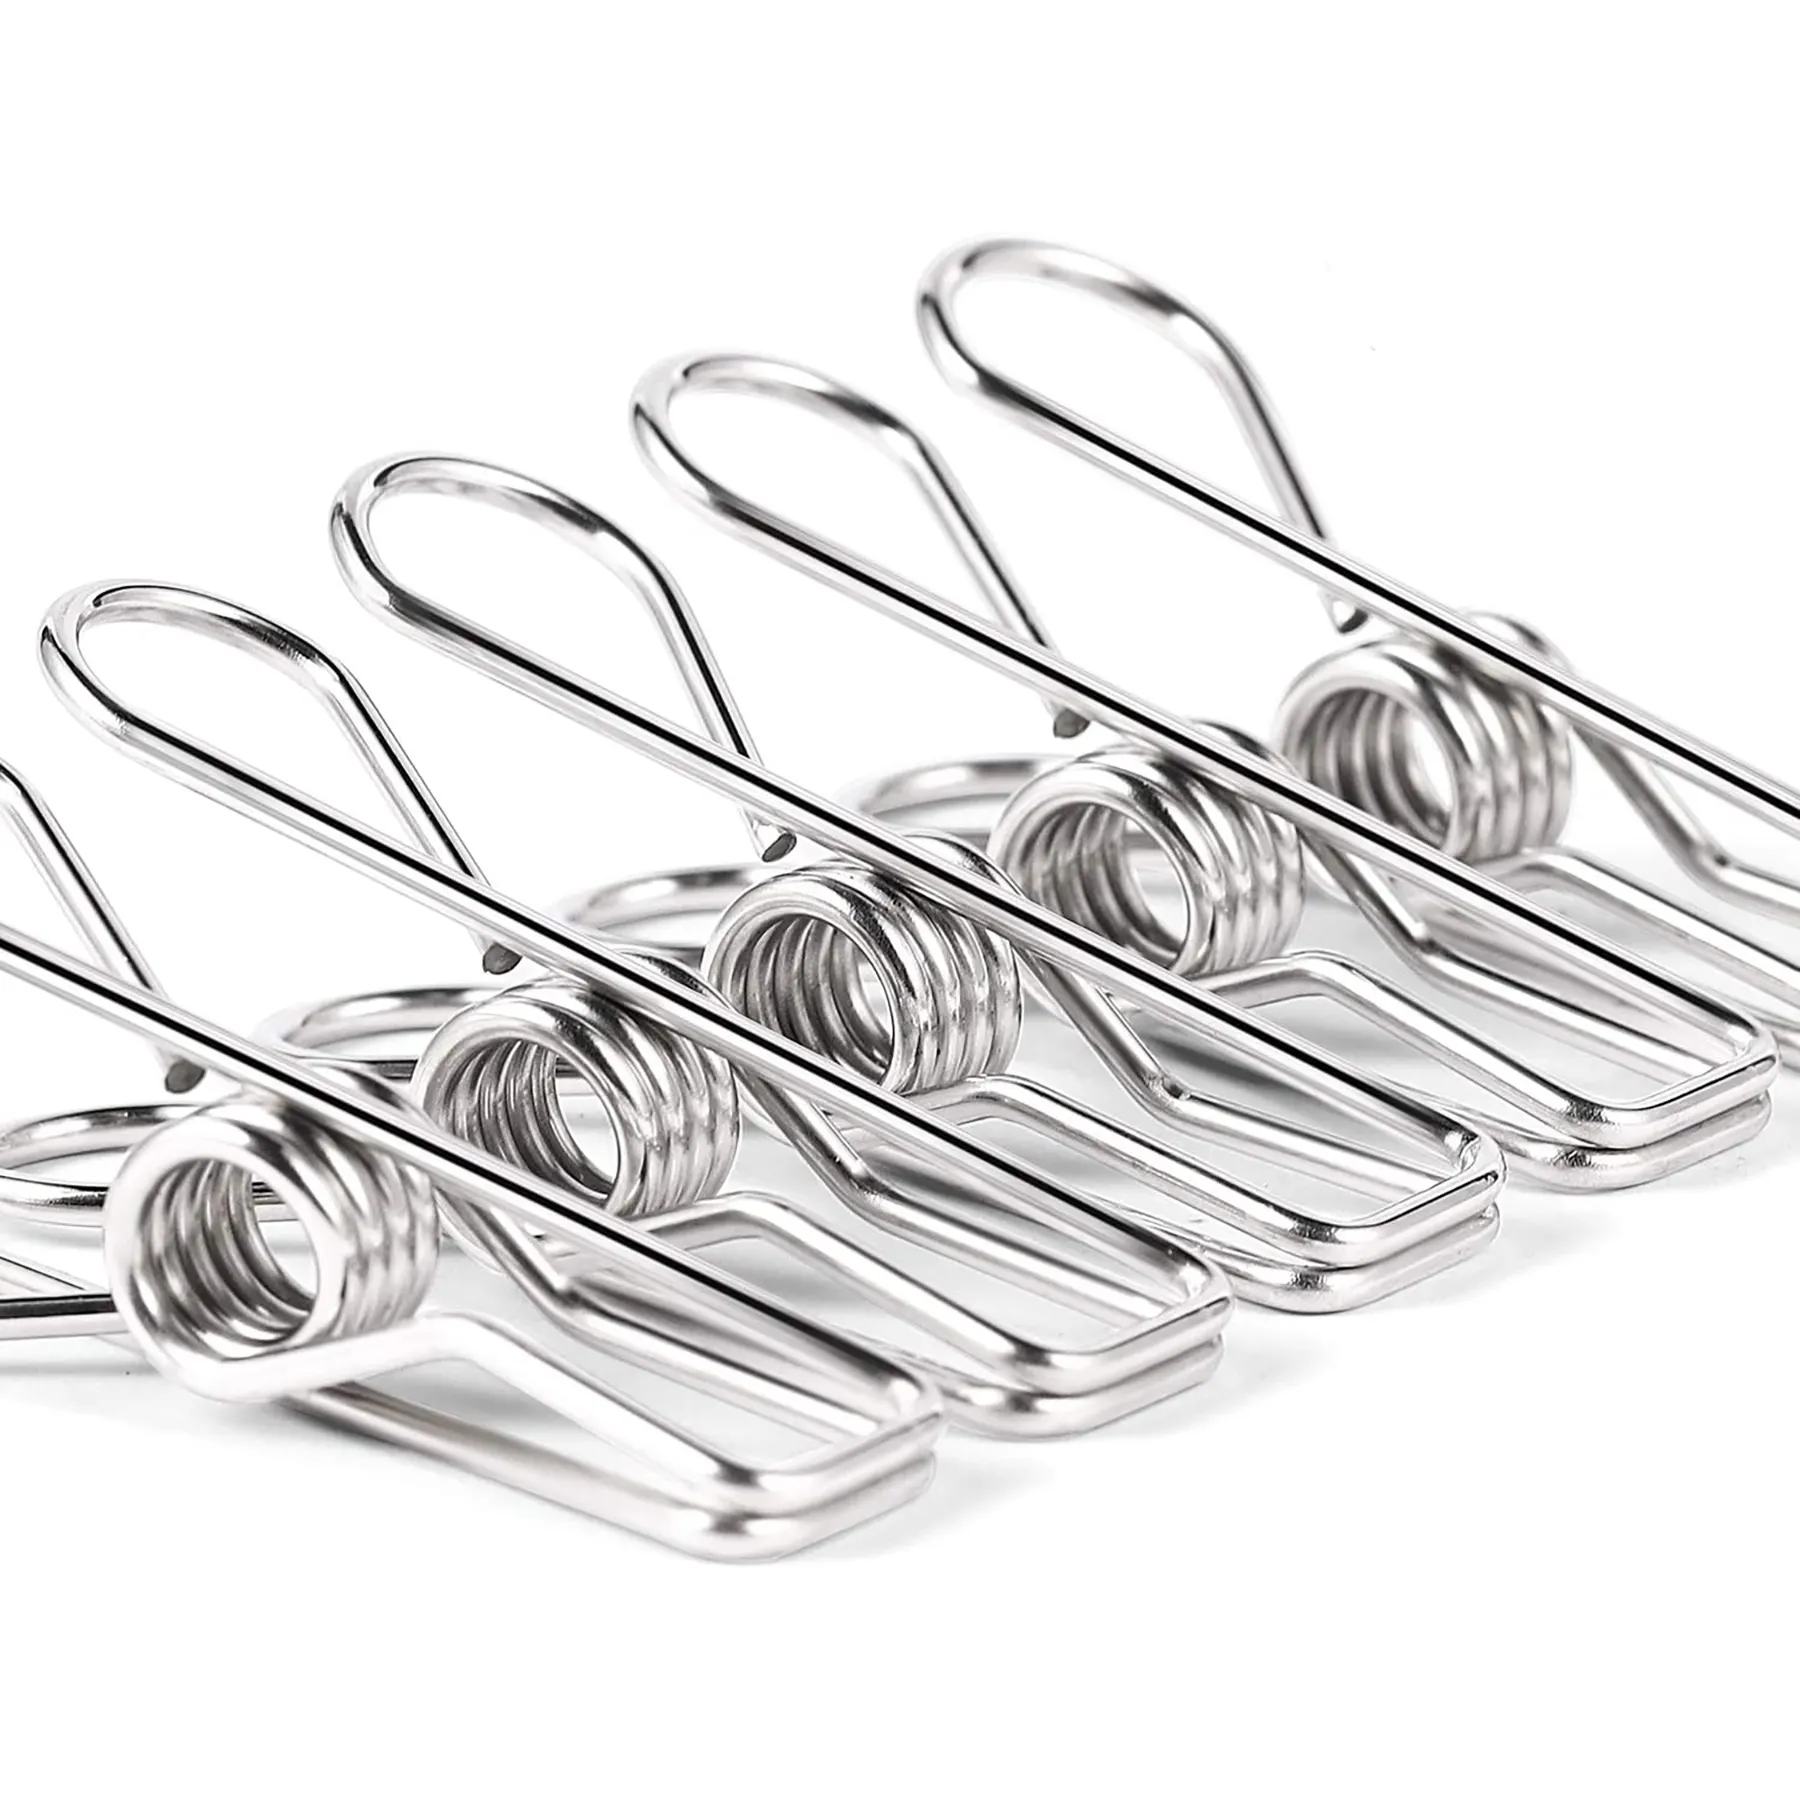 Multipurpose Stainless Steel Clothespins Spring Clips Drying Pegs Clamps For Clothesline Outdoor Kitchen Food Bag Clips